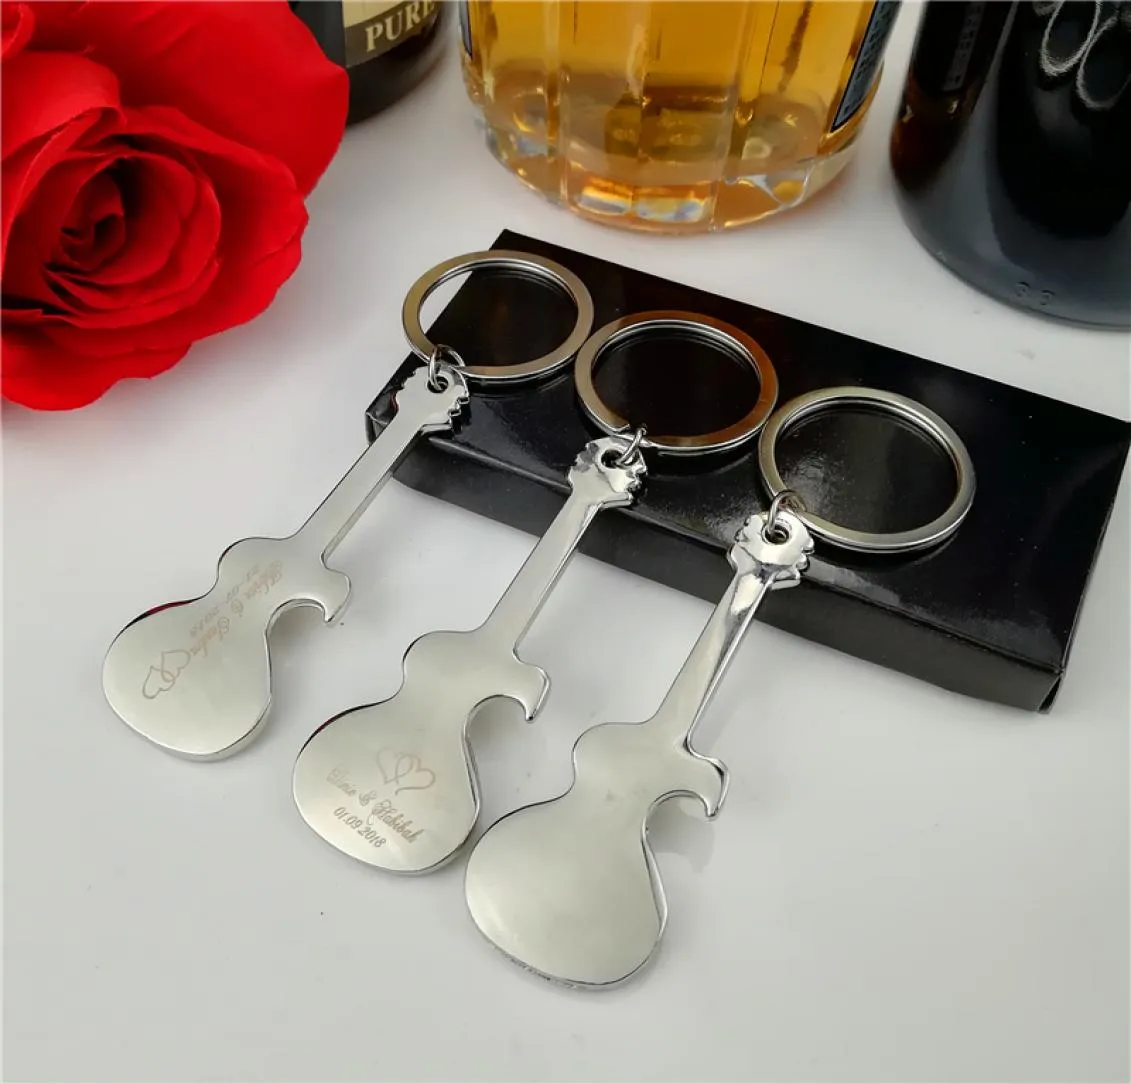 Personalized Bottle Opener Keychain Unique Wedding Favor Guitar Shaped Metal Key Chain Wedding Souvenir Gift for Guest 20Pack3606129